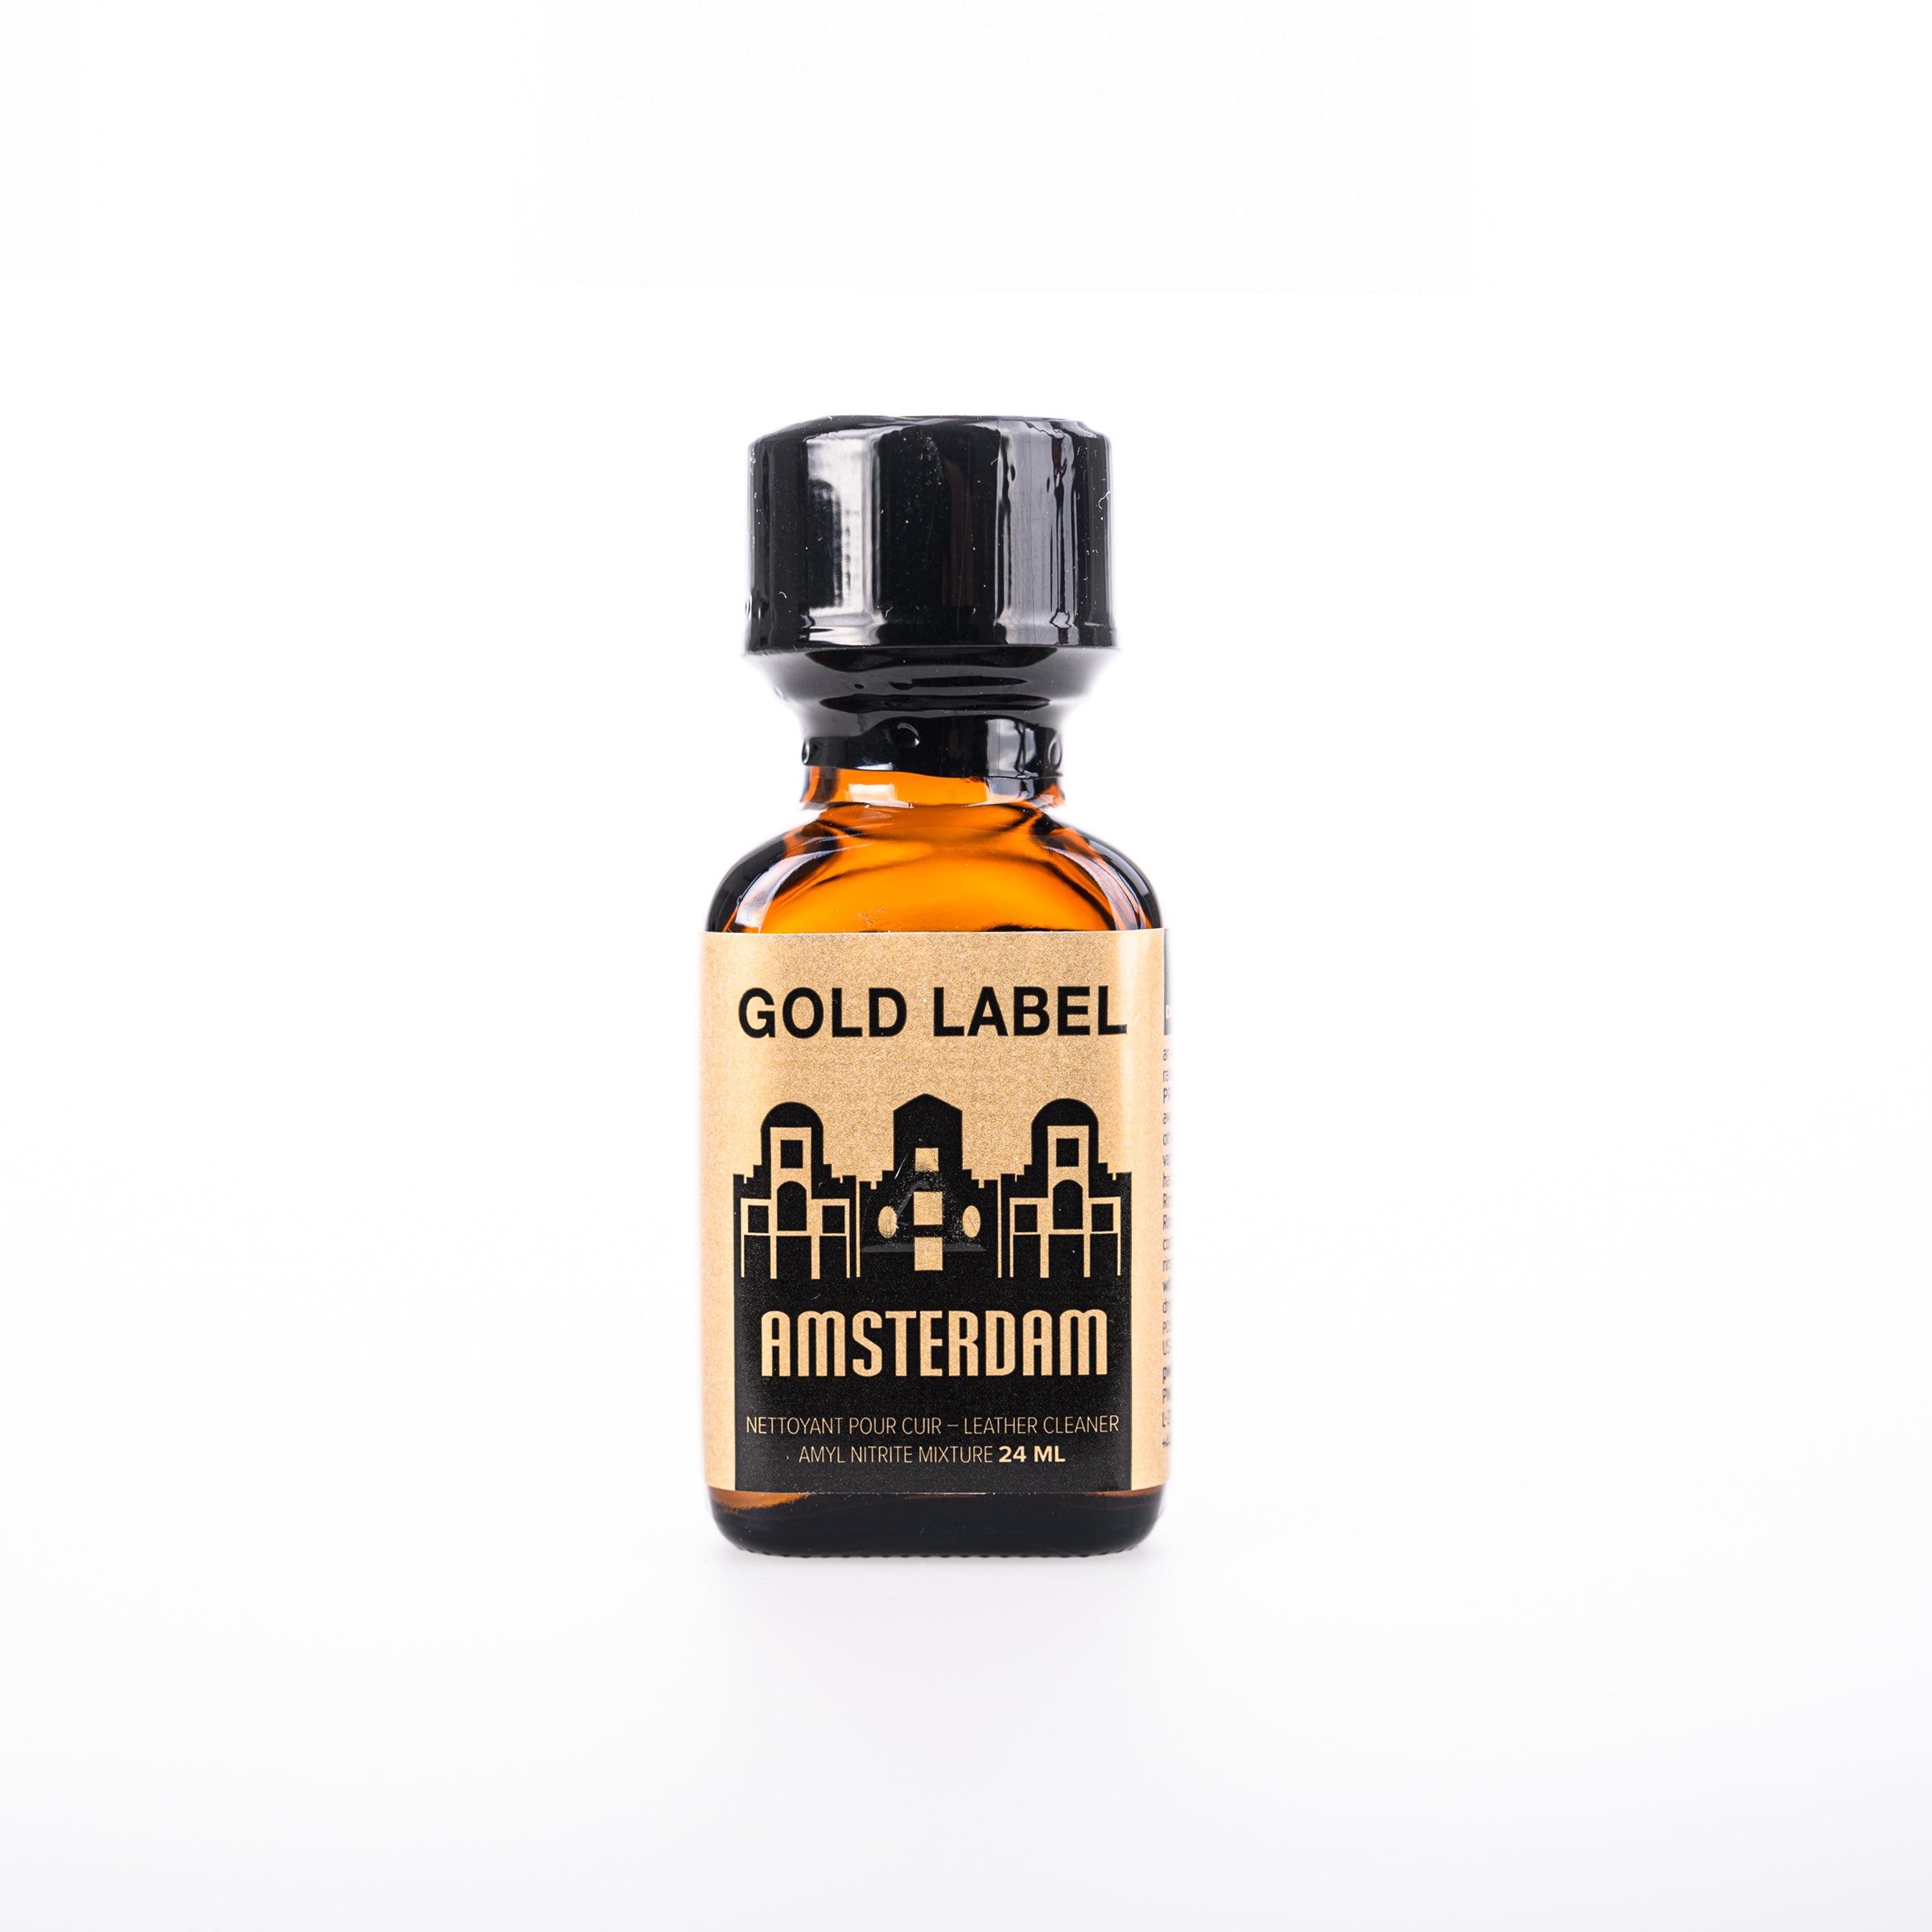 A product photo of a bottle of Amsterdam Gold Poppers.